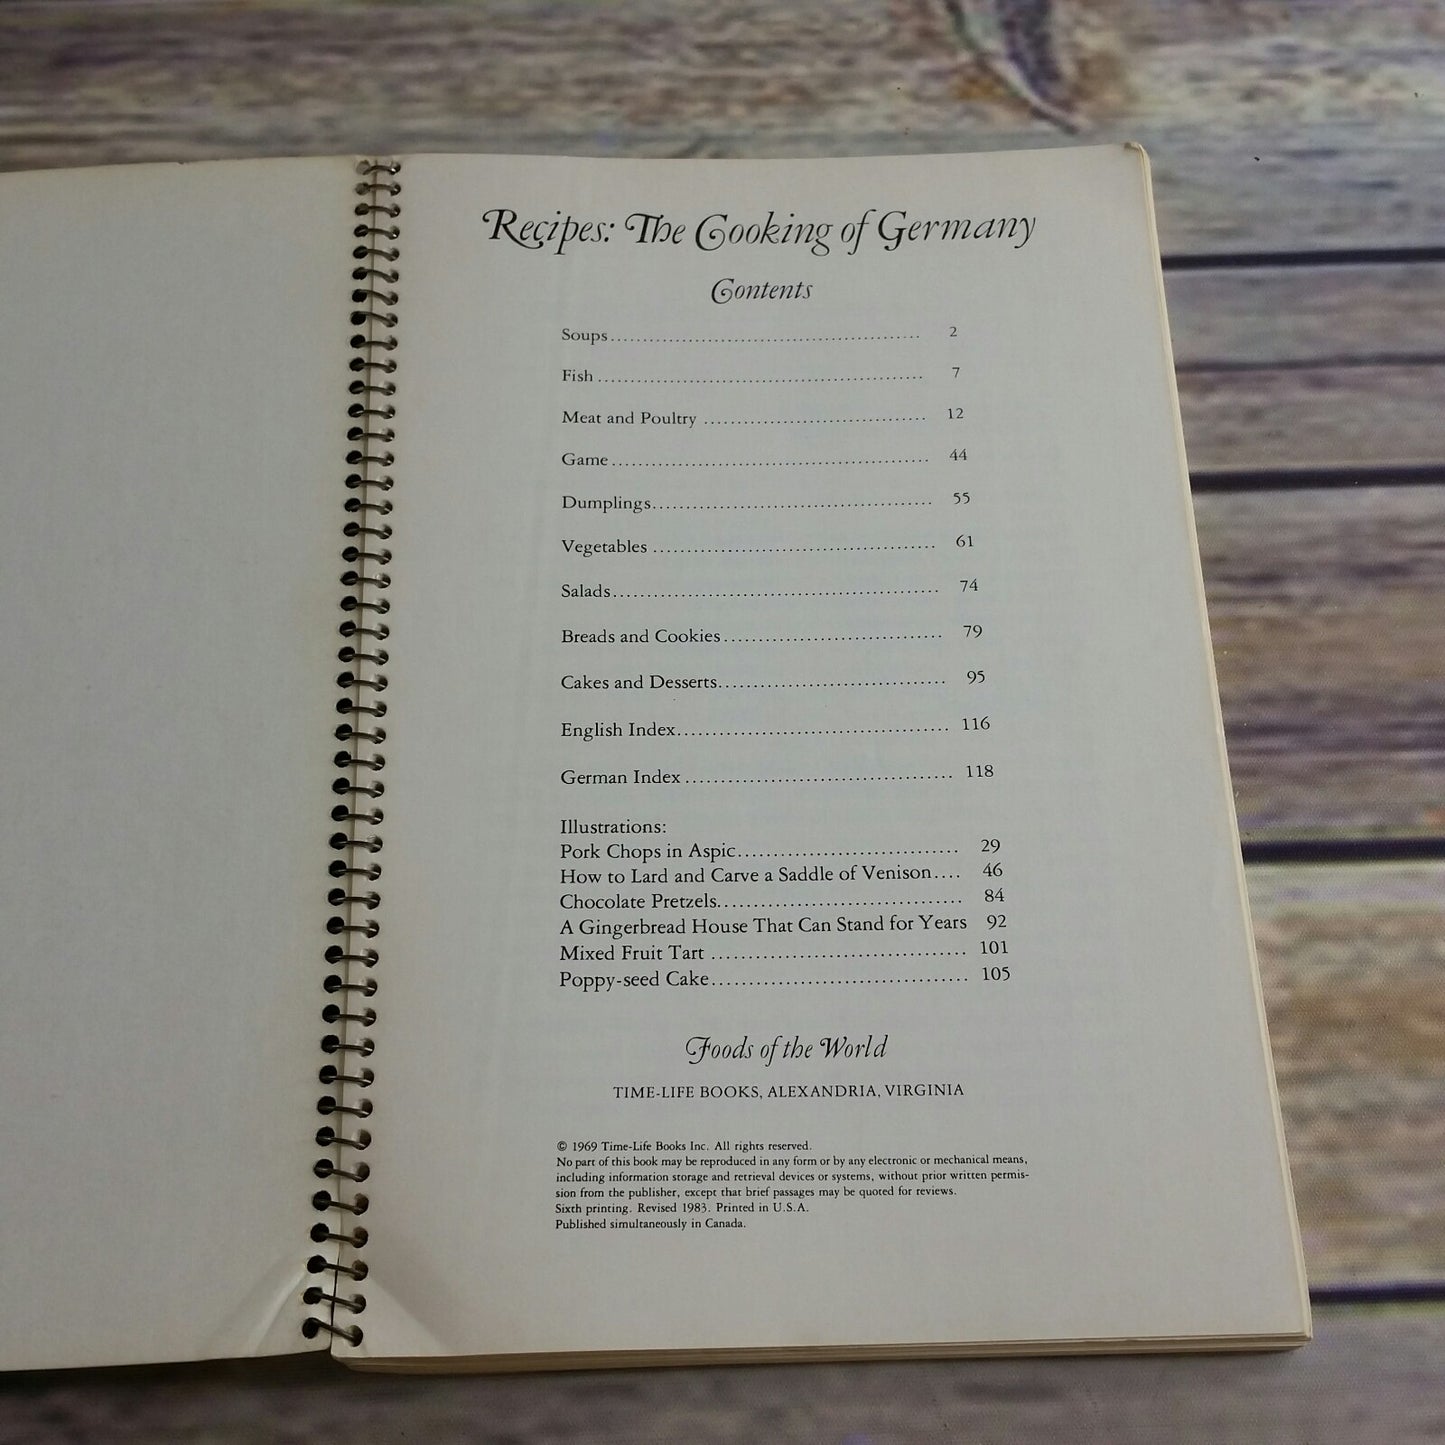 Vtg German Cookbook Recipes The Cooking of Germany Time Life Books Foods of the World 1969 Spiral Bound German Food Recipes